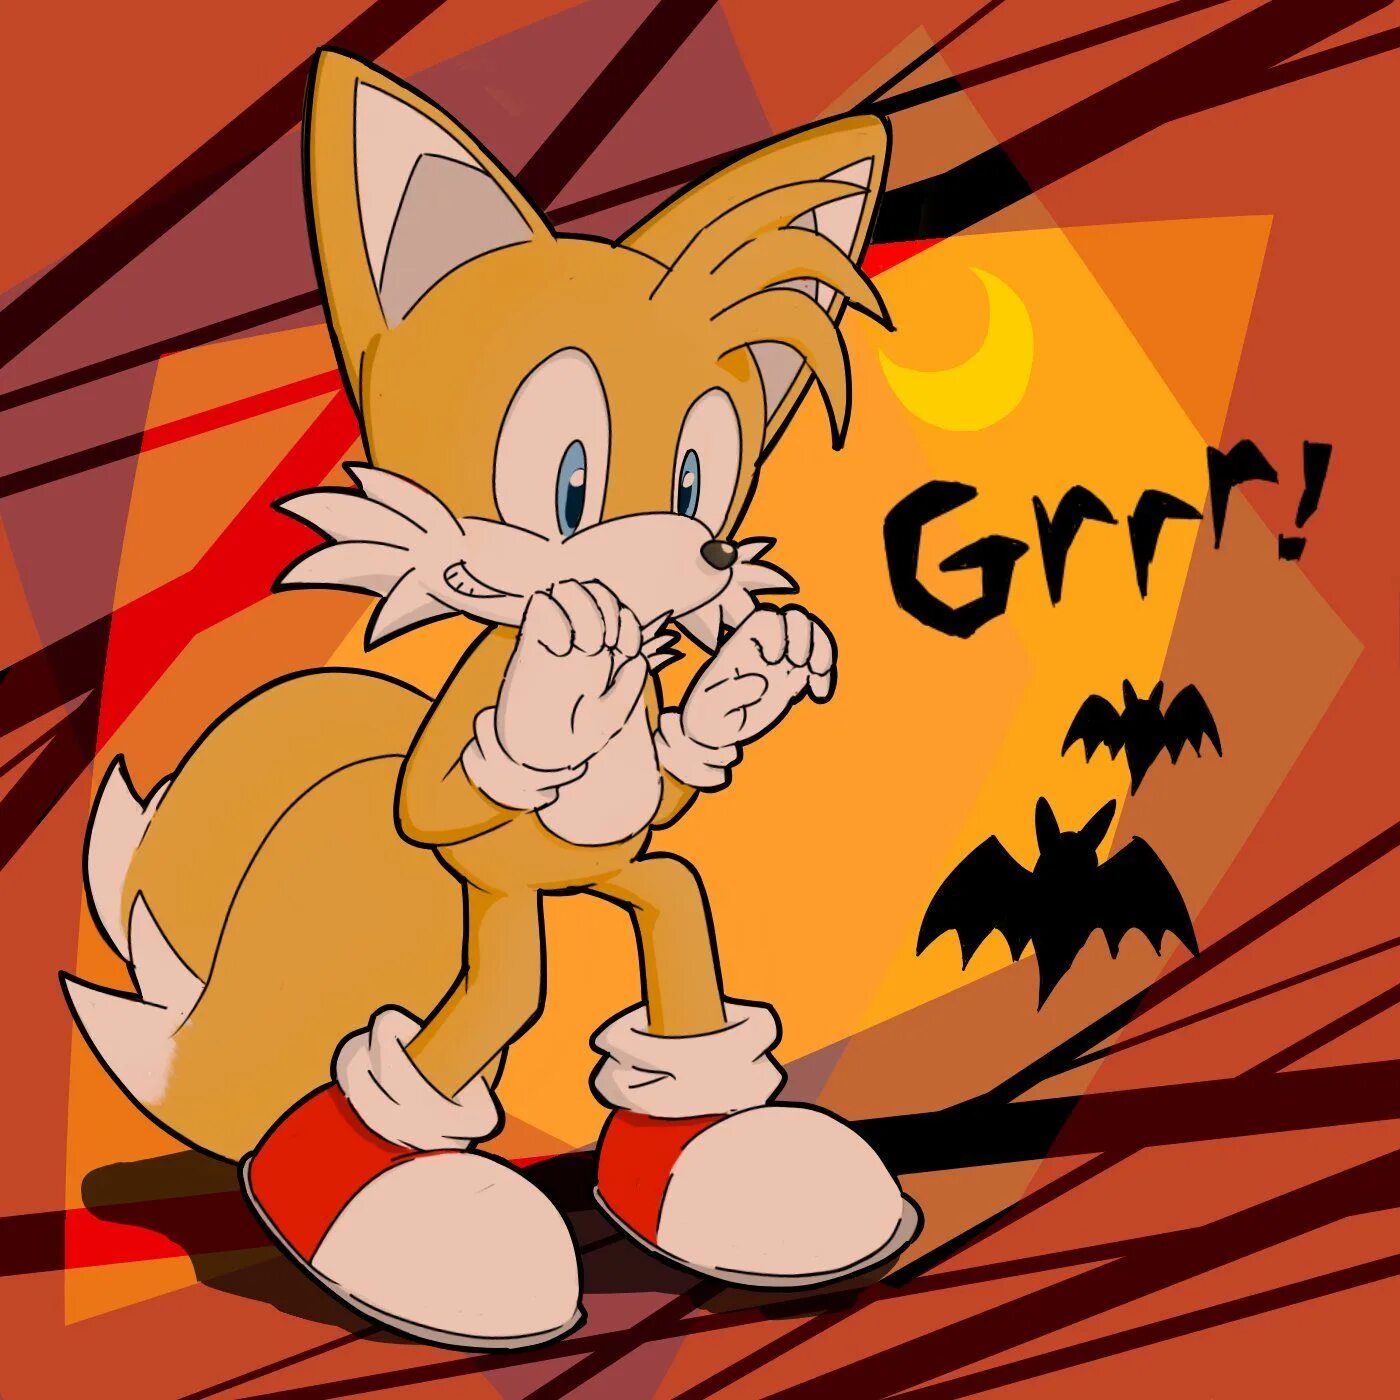 Tails Fan Art. Miles Tails. Miles Tails Prower Fan Art. Tails animations